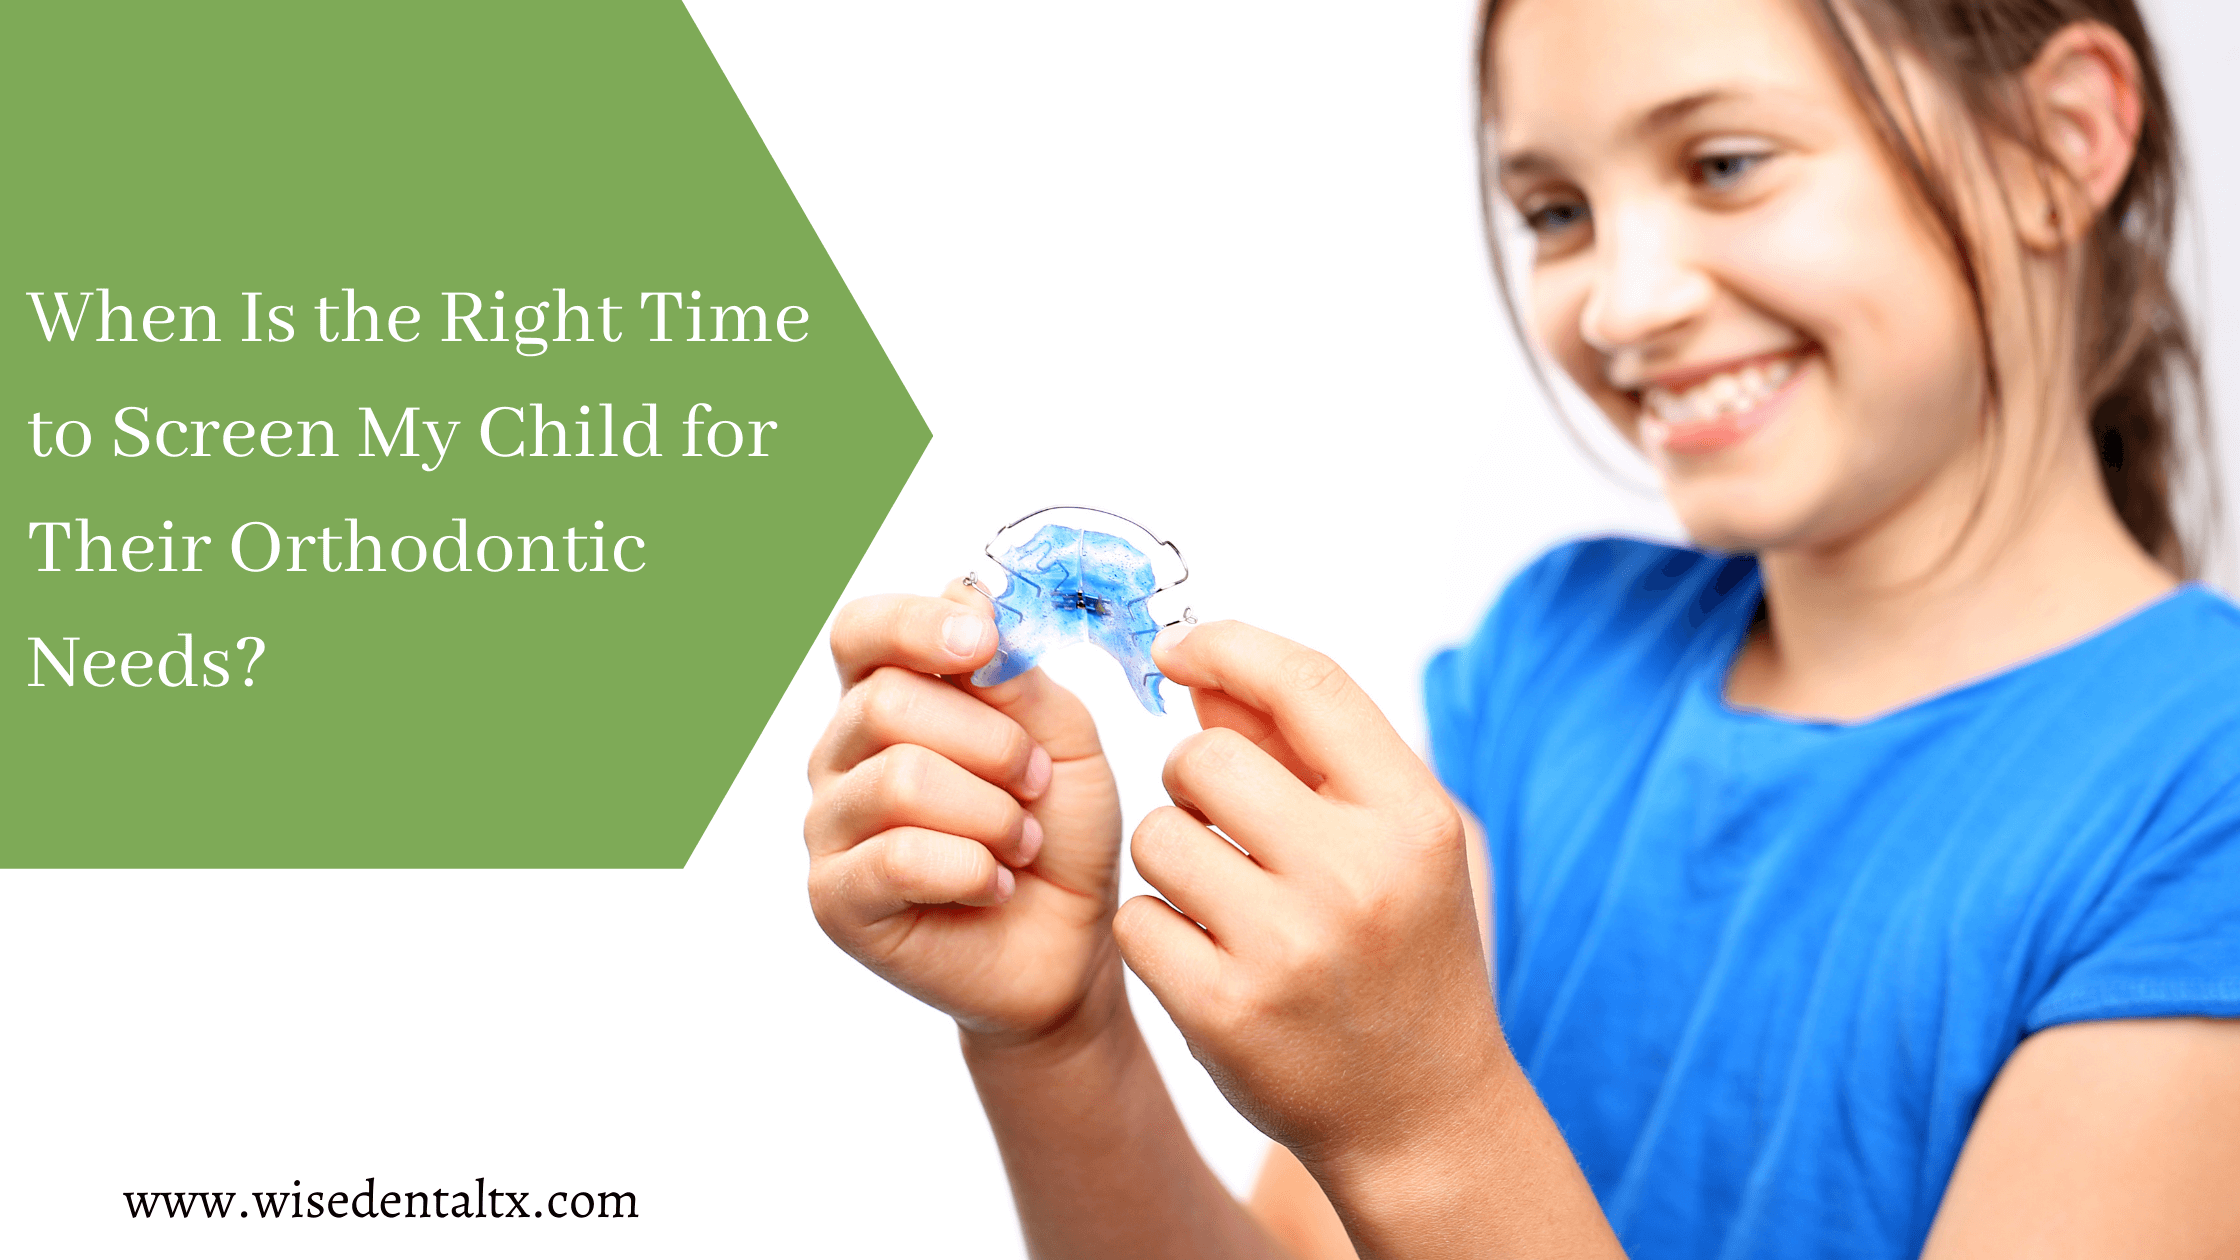 When Is the Right Time to Screen My Child for Their Orthodontic Needs?